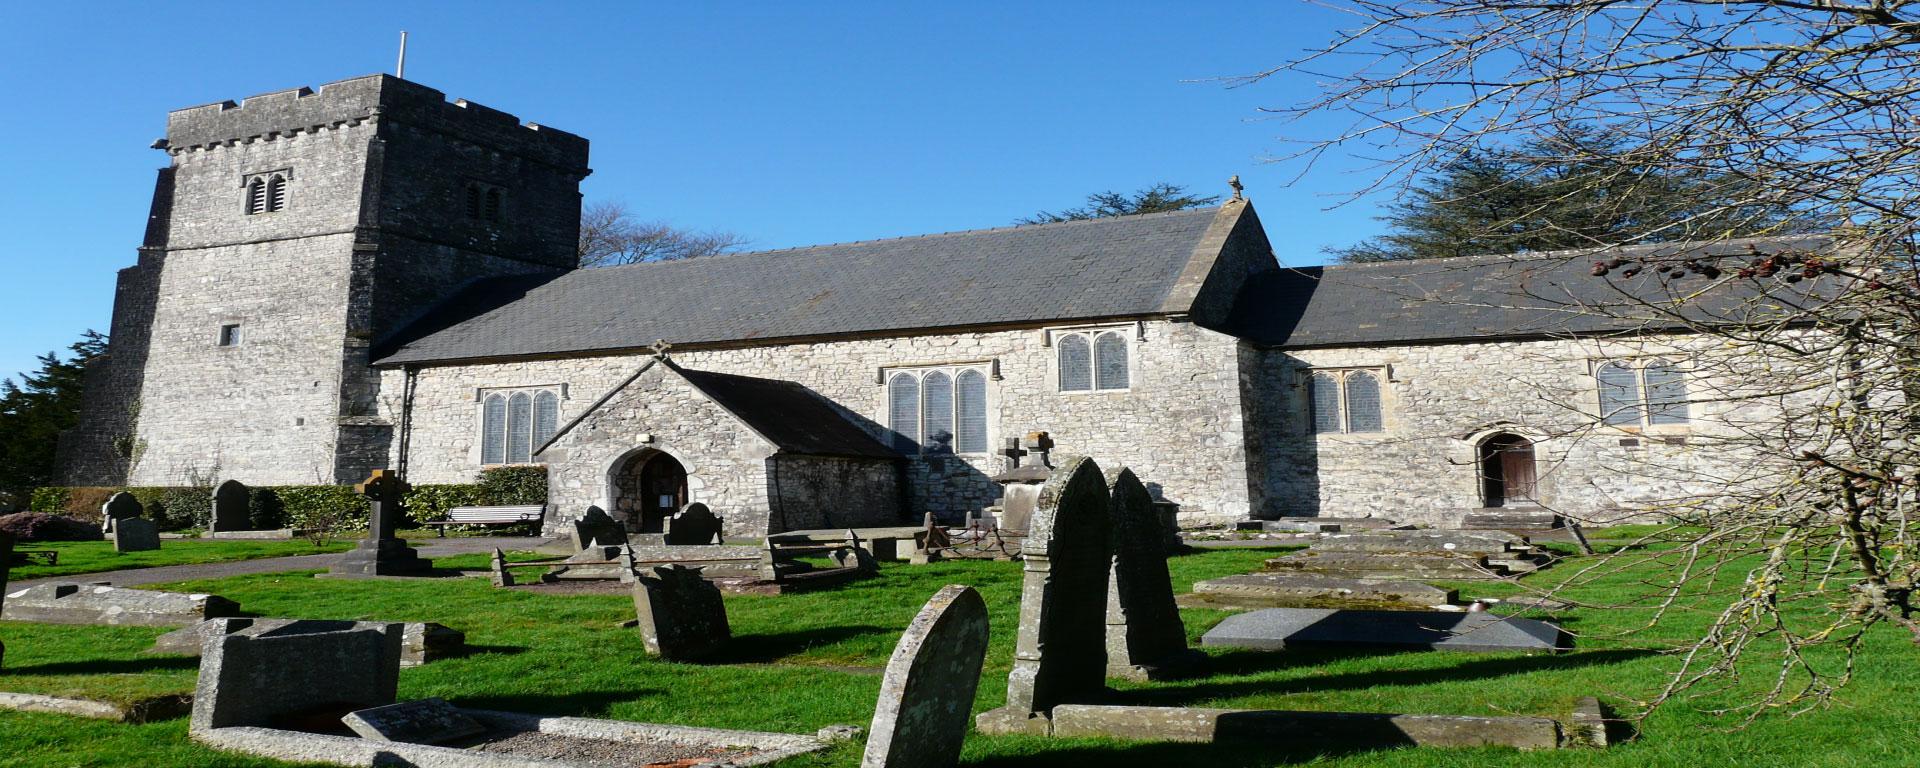 St Peter's church and graveyard